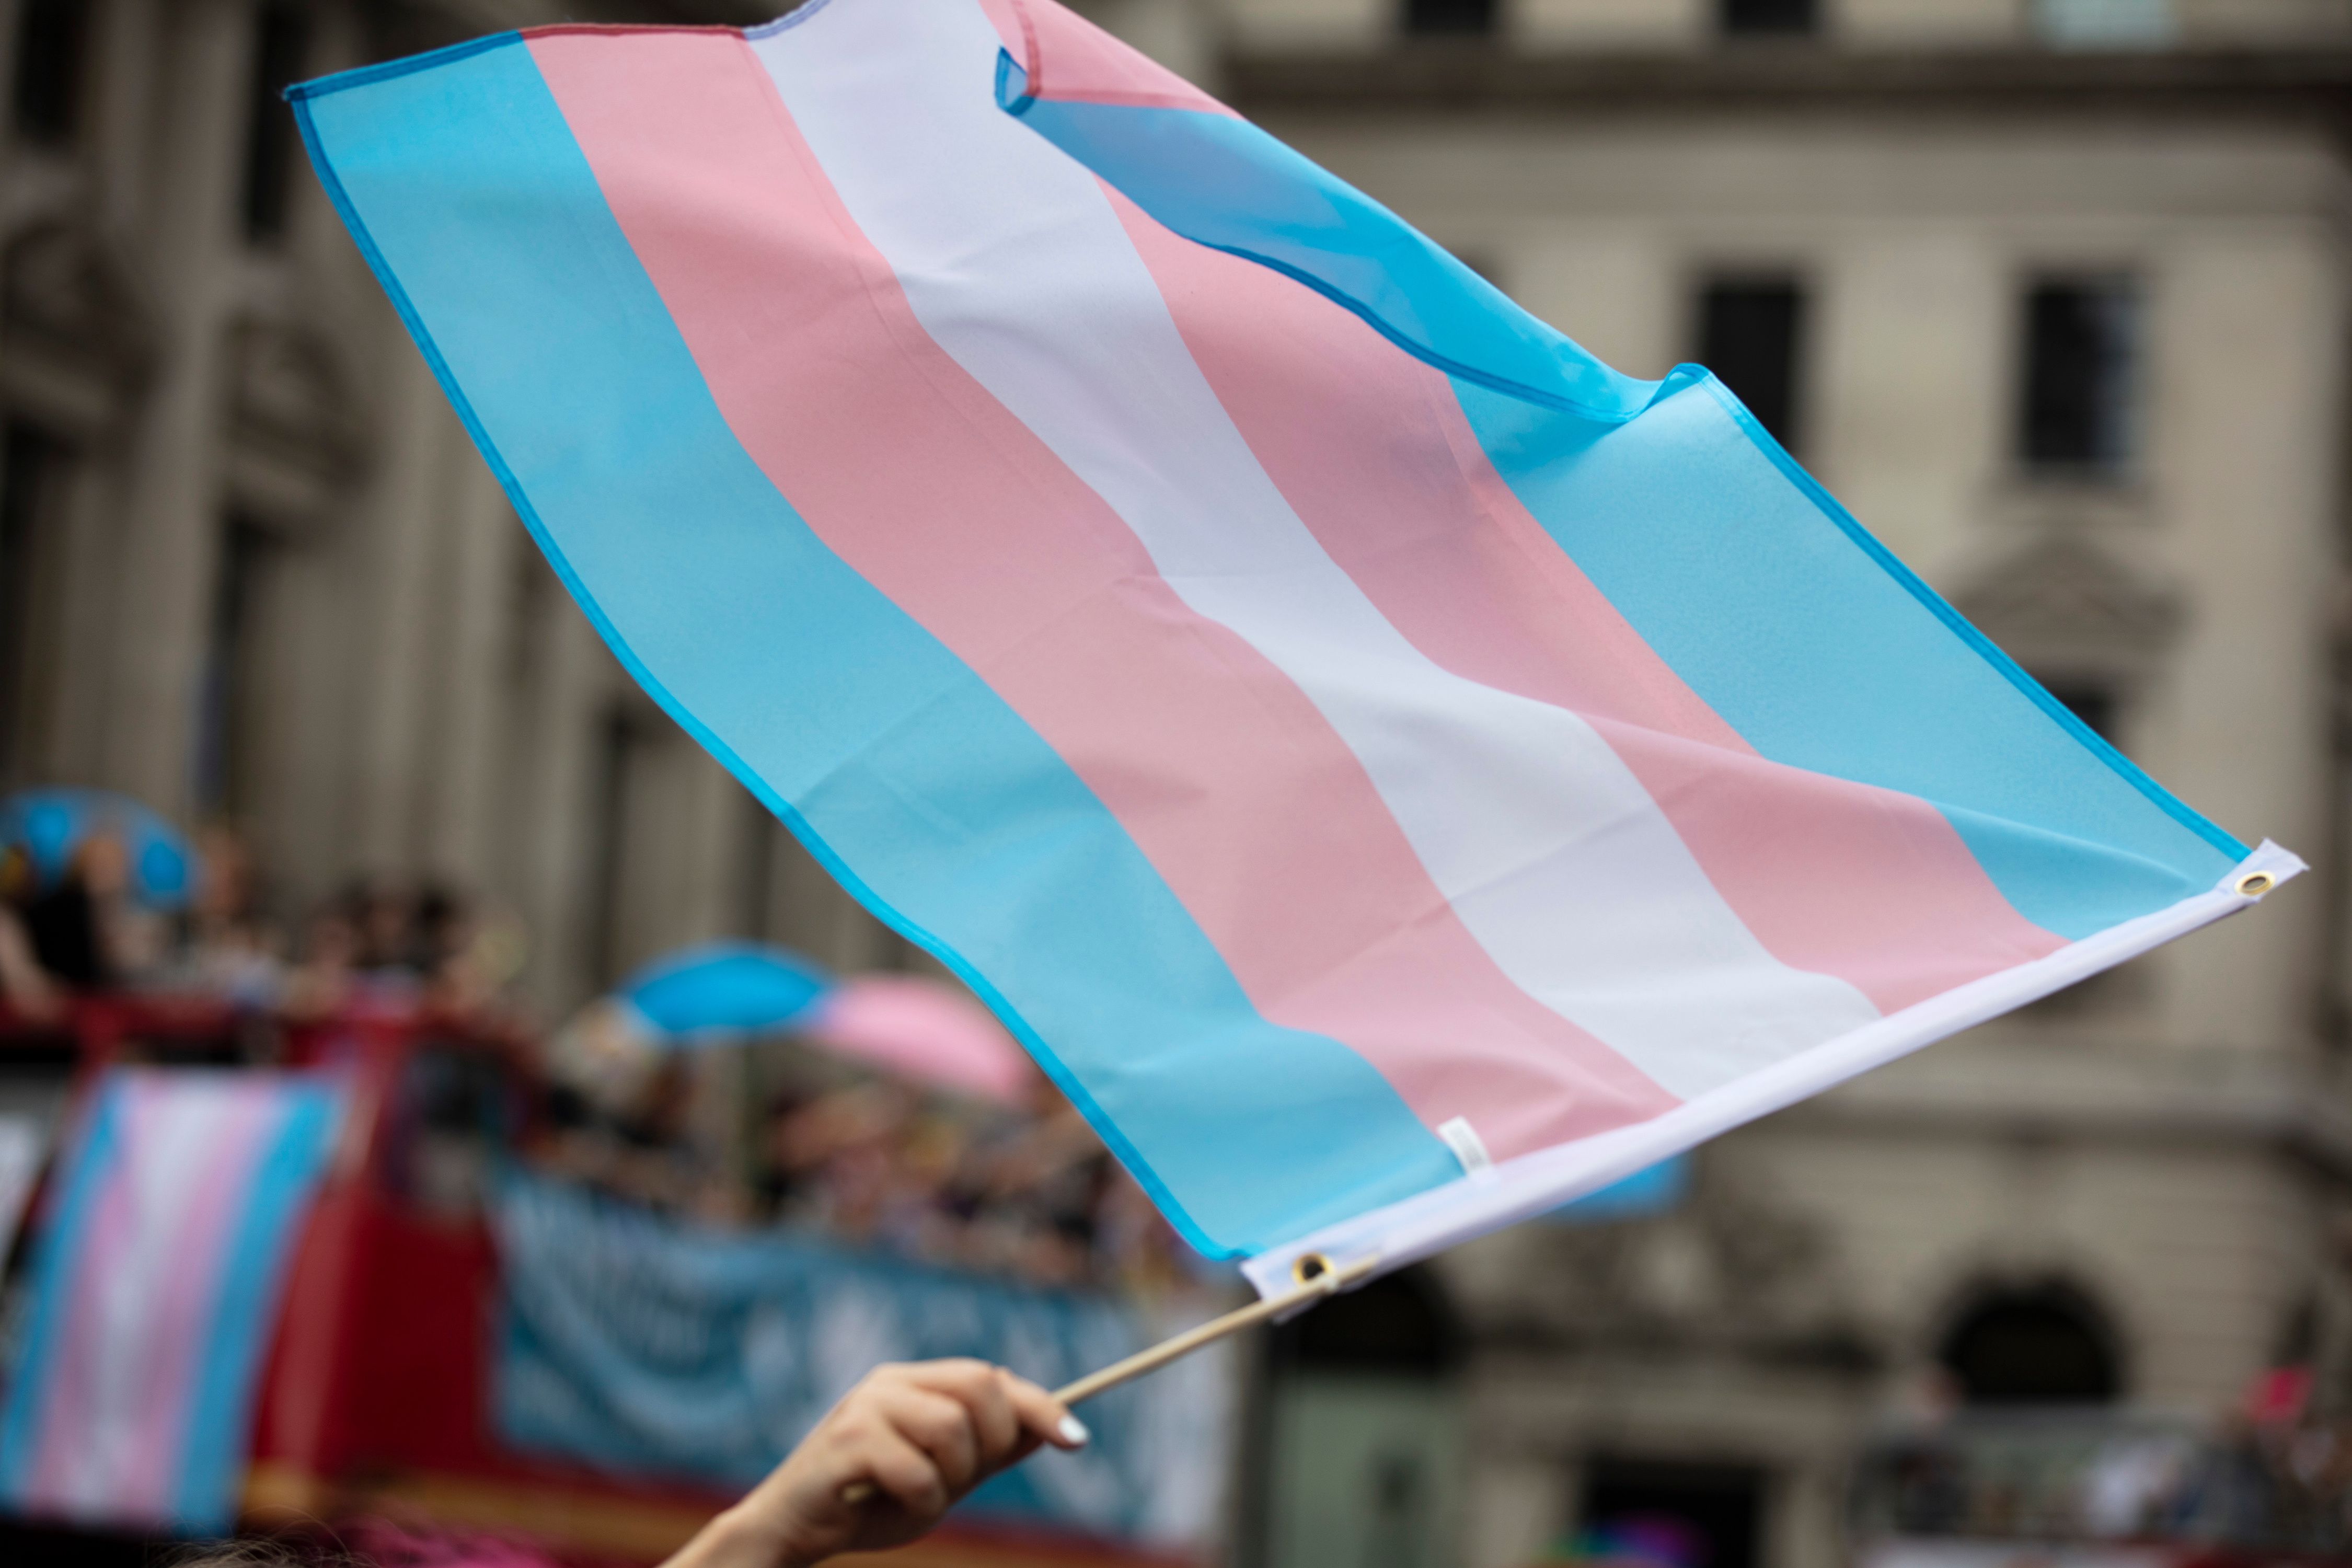 Understanding and supporting the transgender community